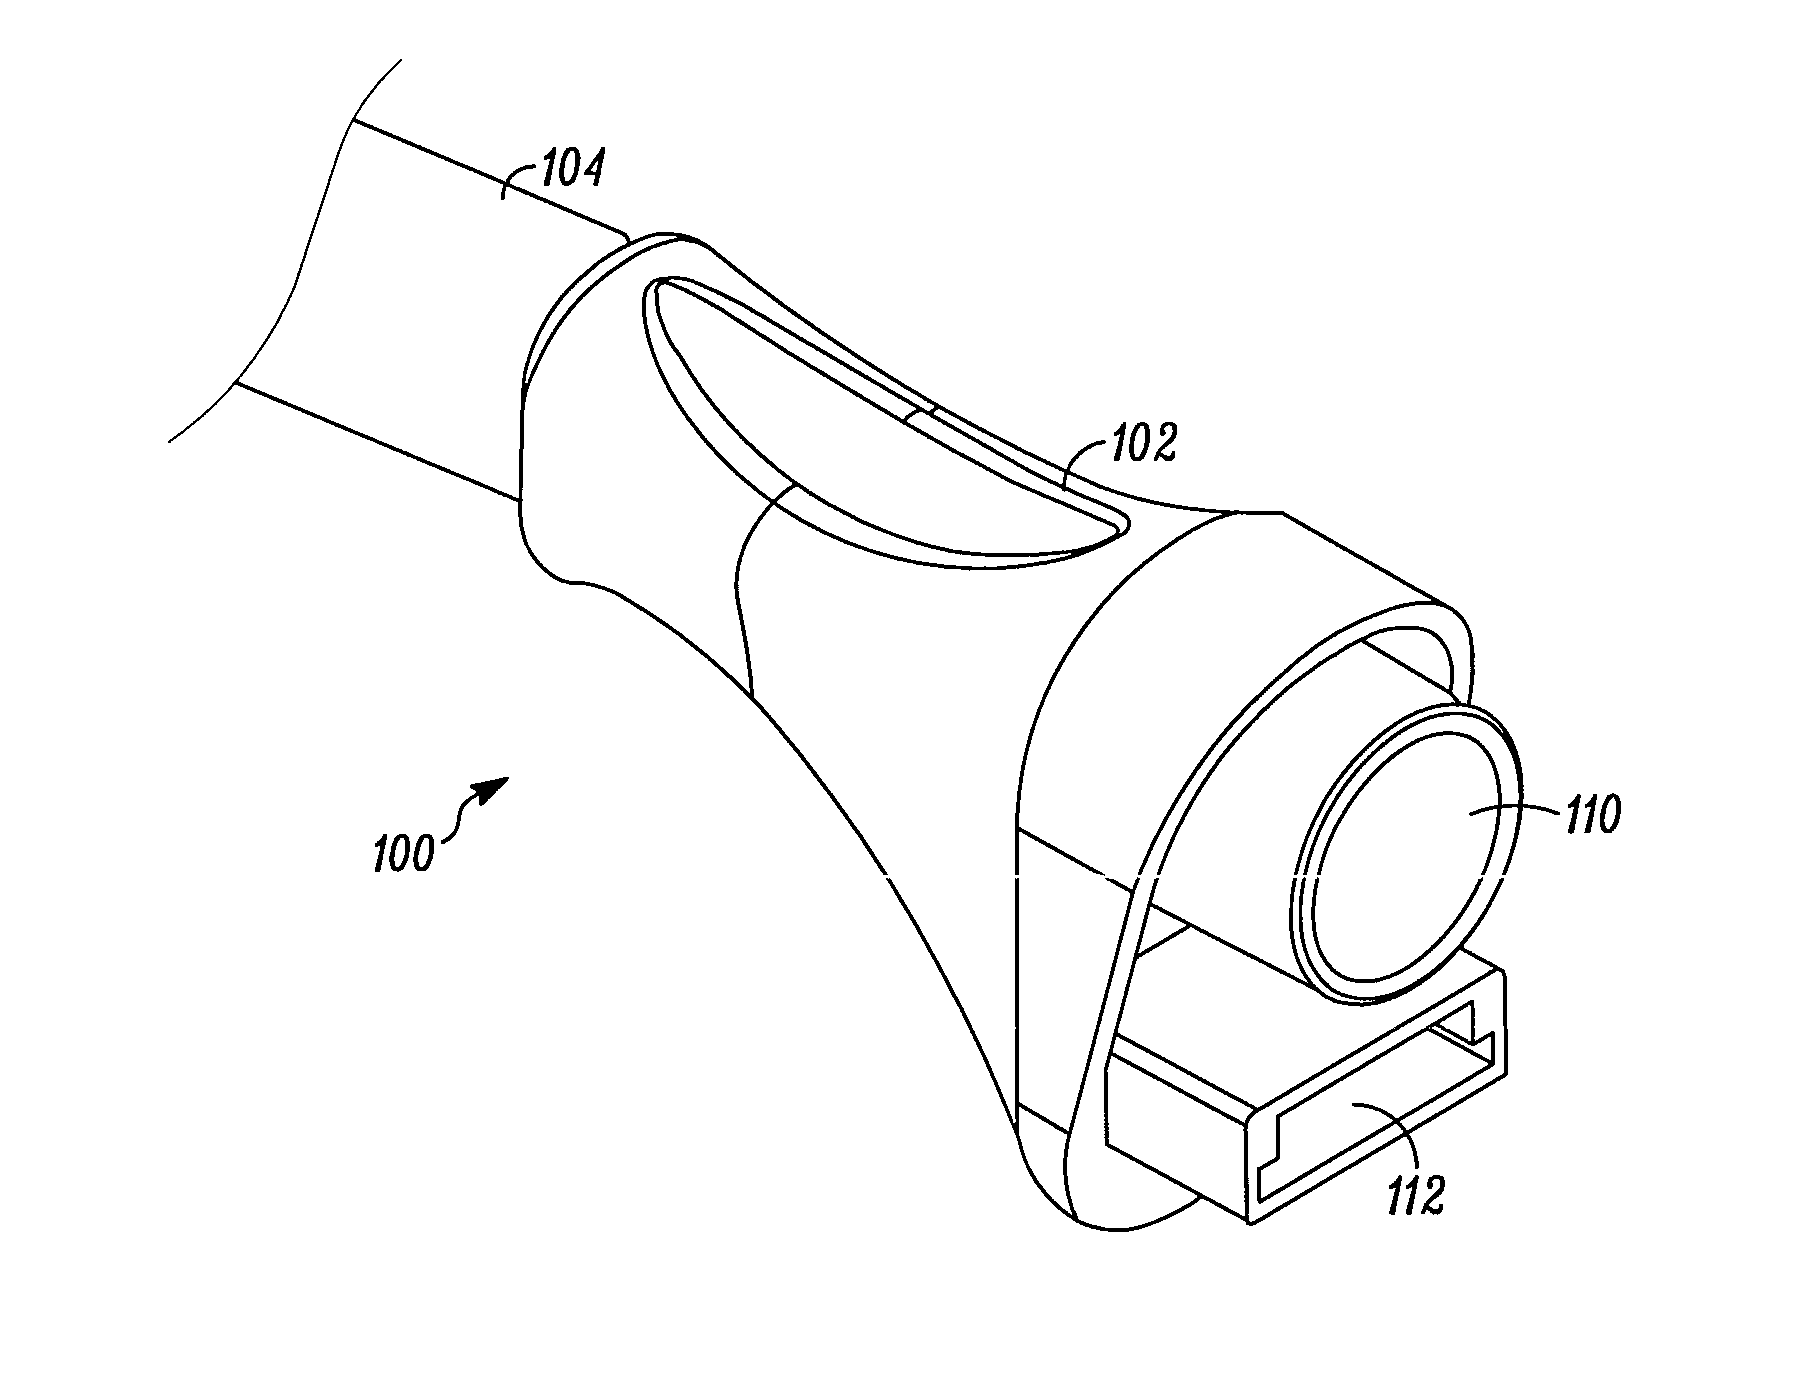 System for identifying the presence and correctness of a medical device accessory